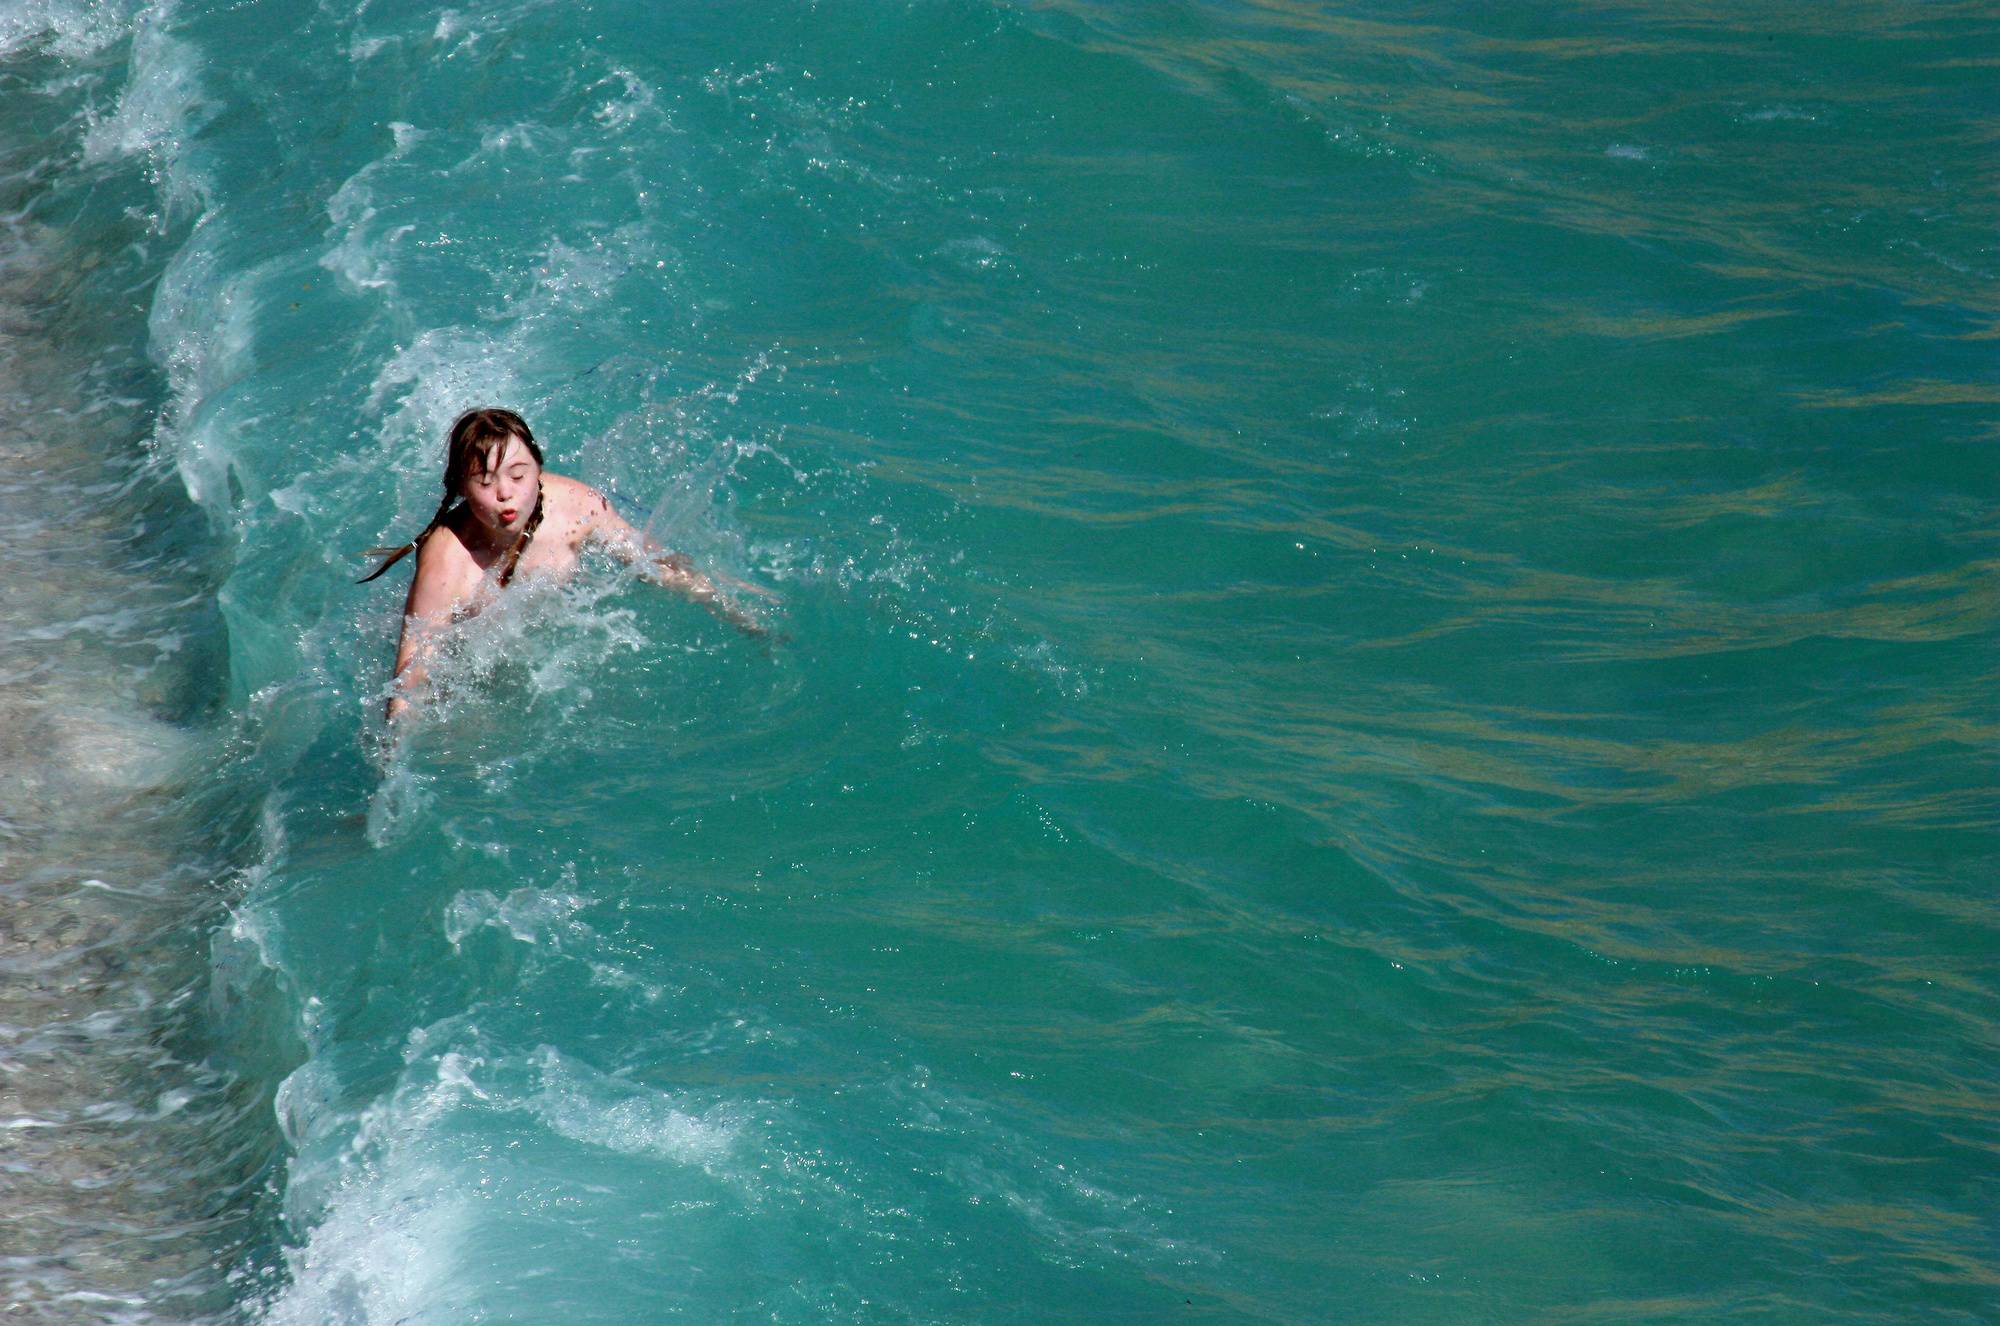 Purenudism Pics-Naturist Cold Water Entry - 3